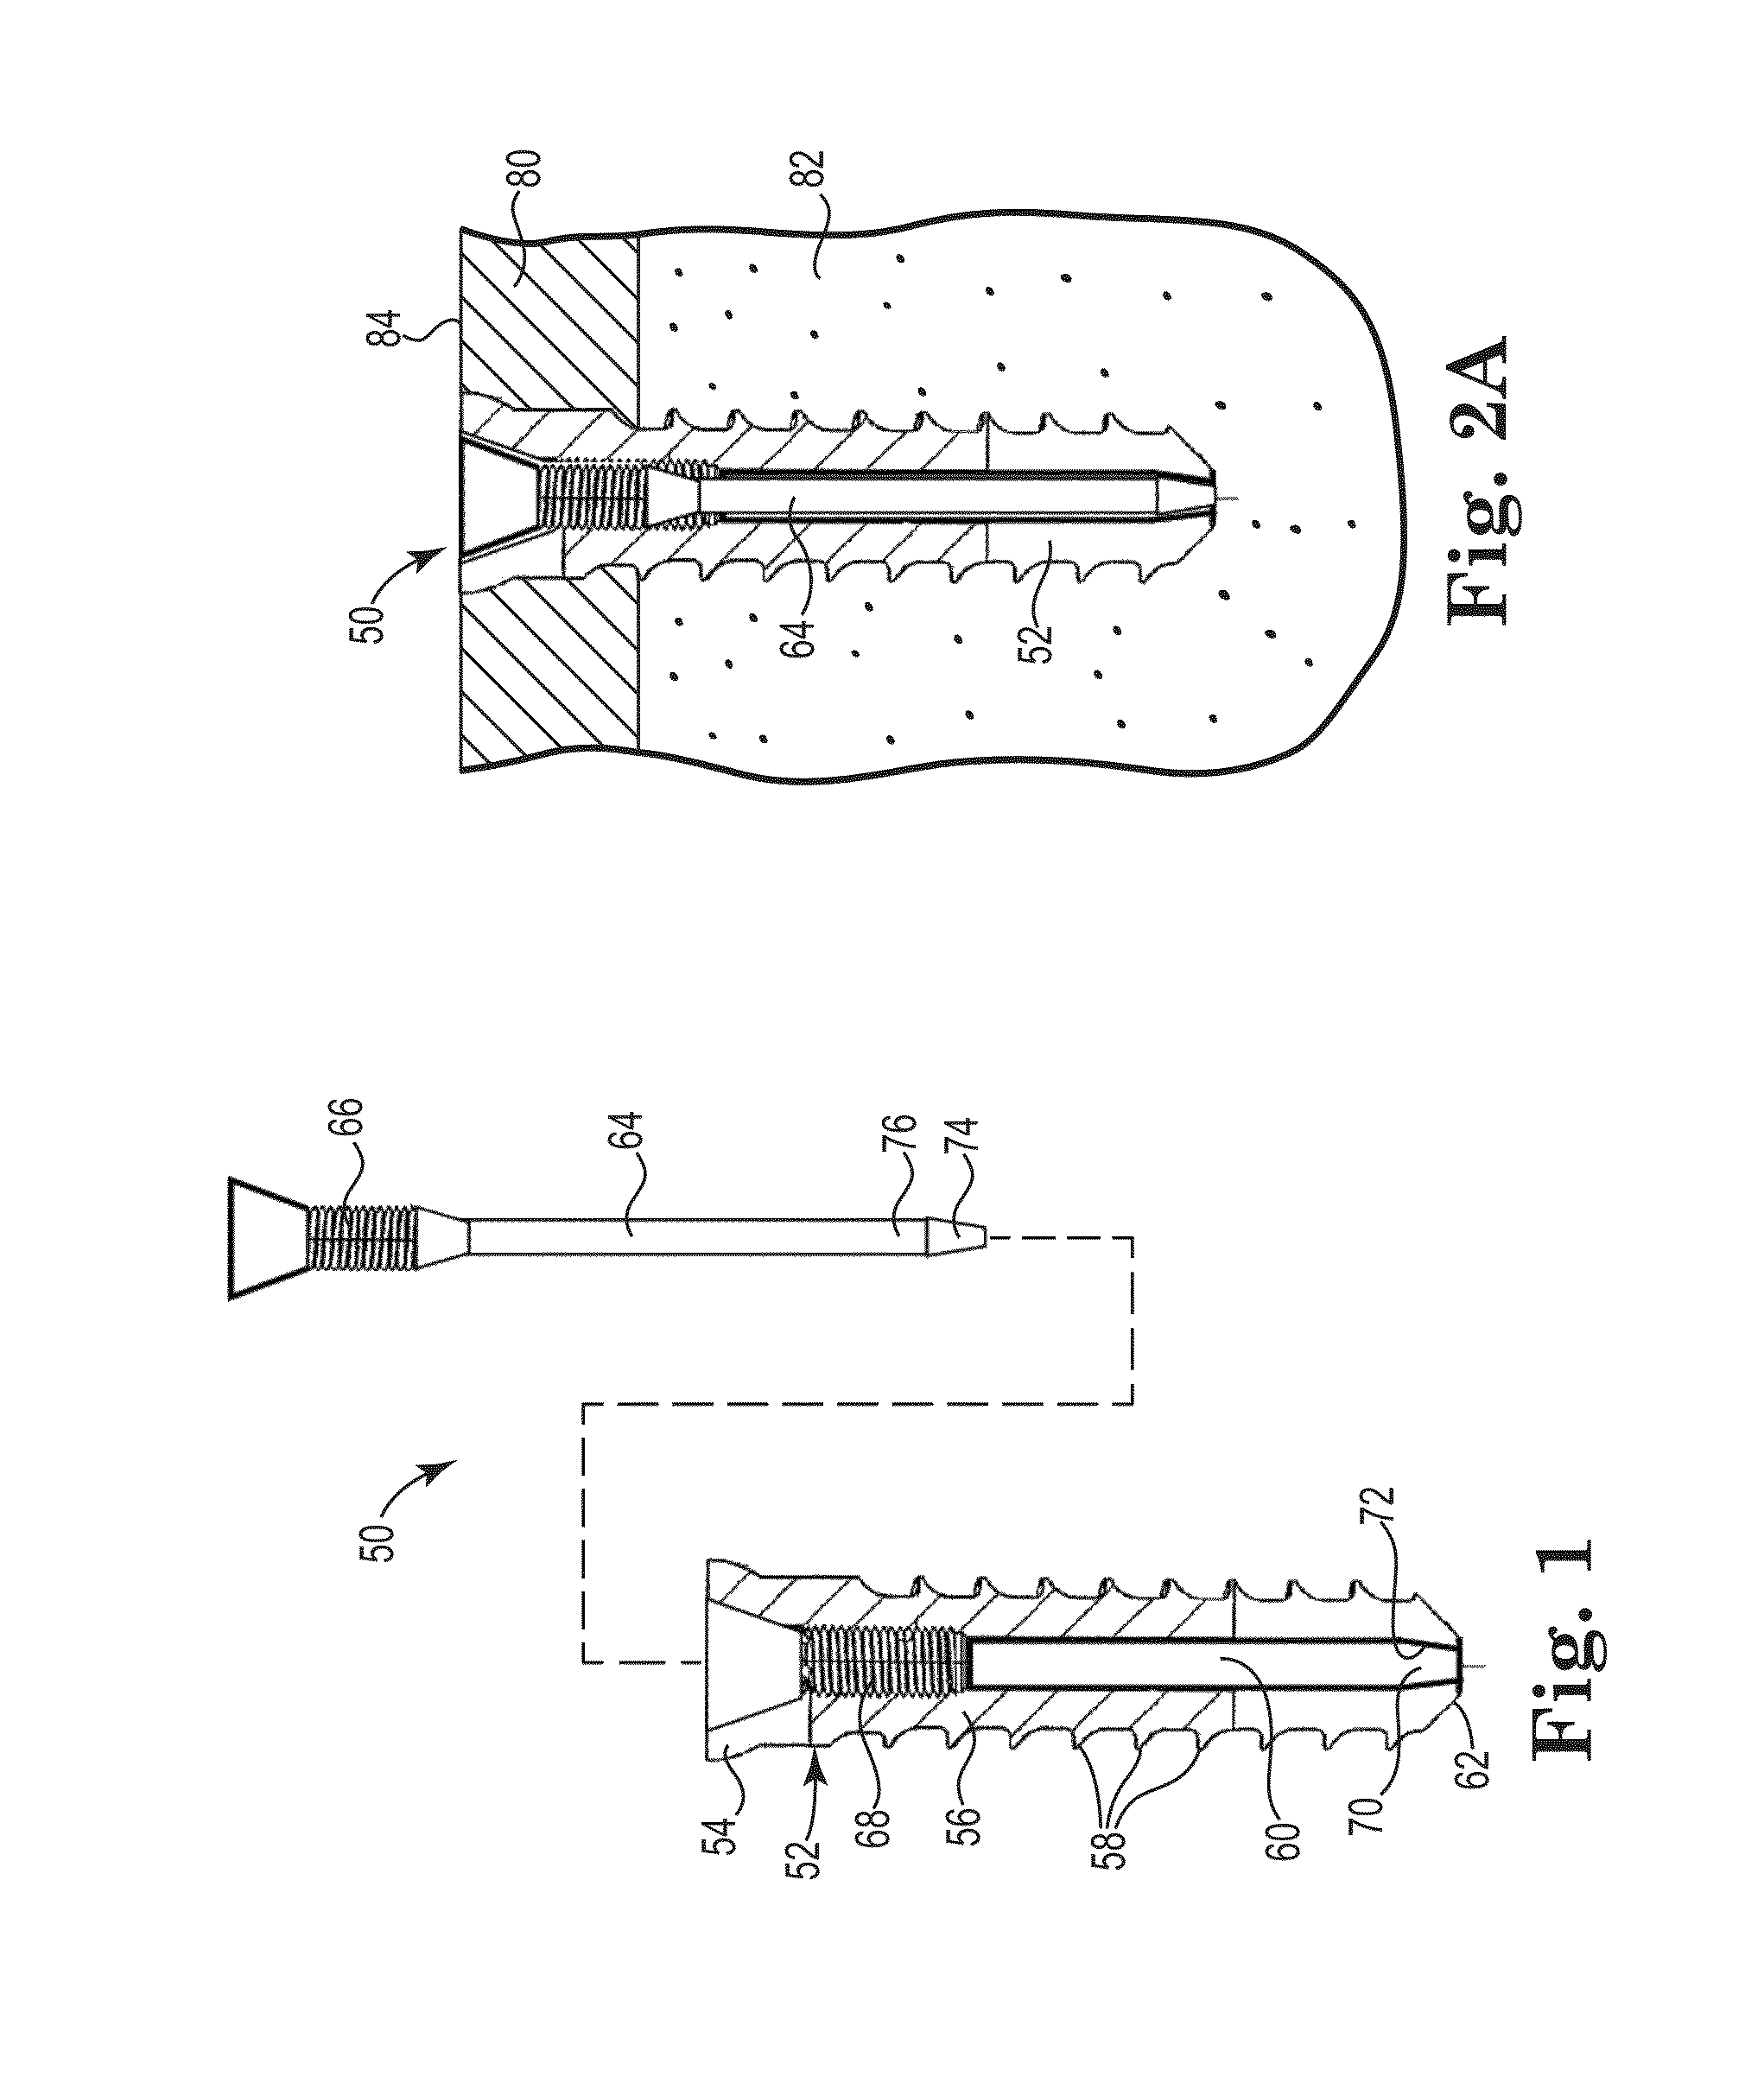 Fixation system for orthopedic devices